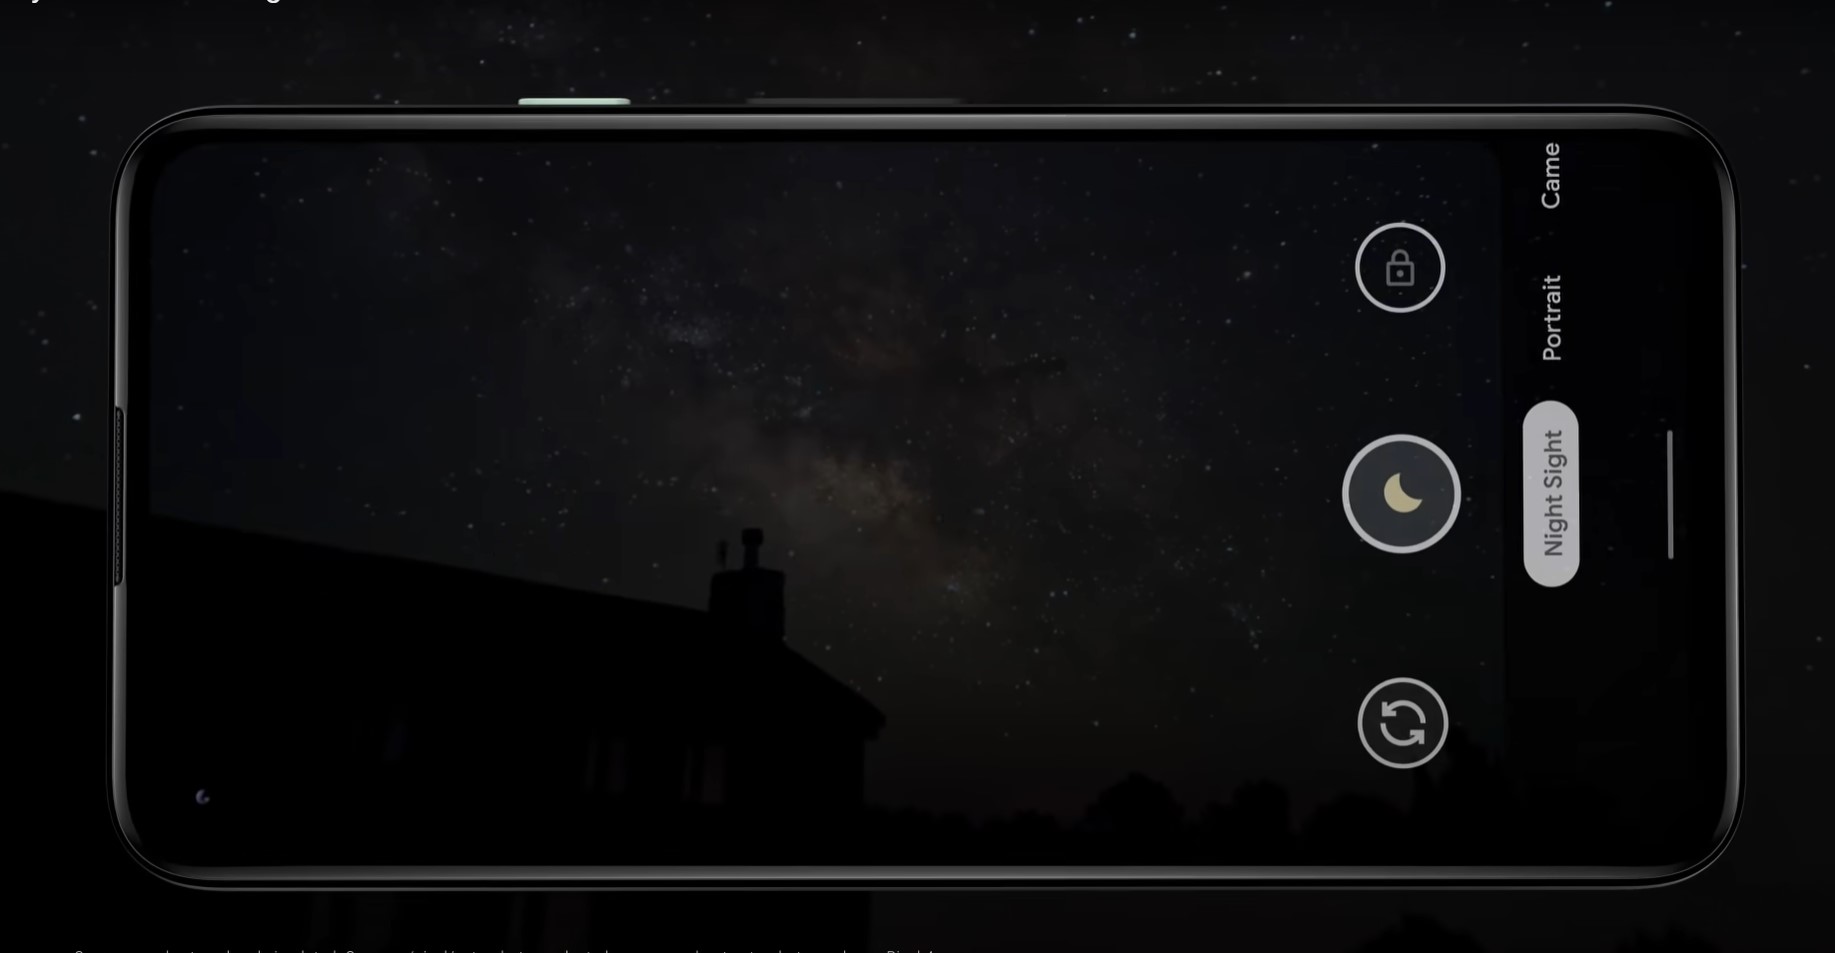 Download and install latest Google Camera APK